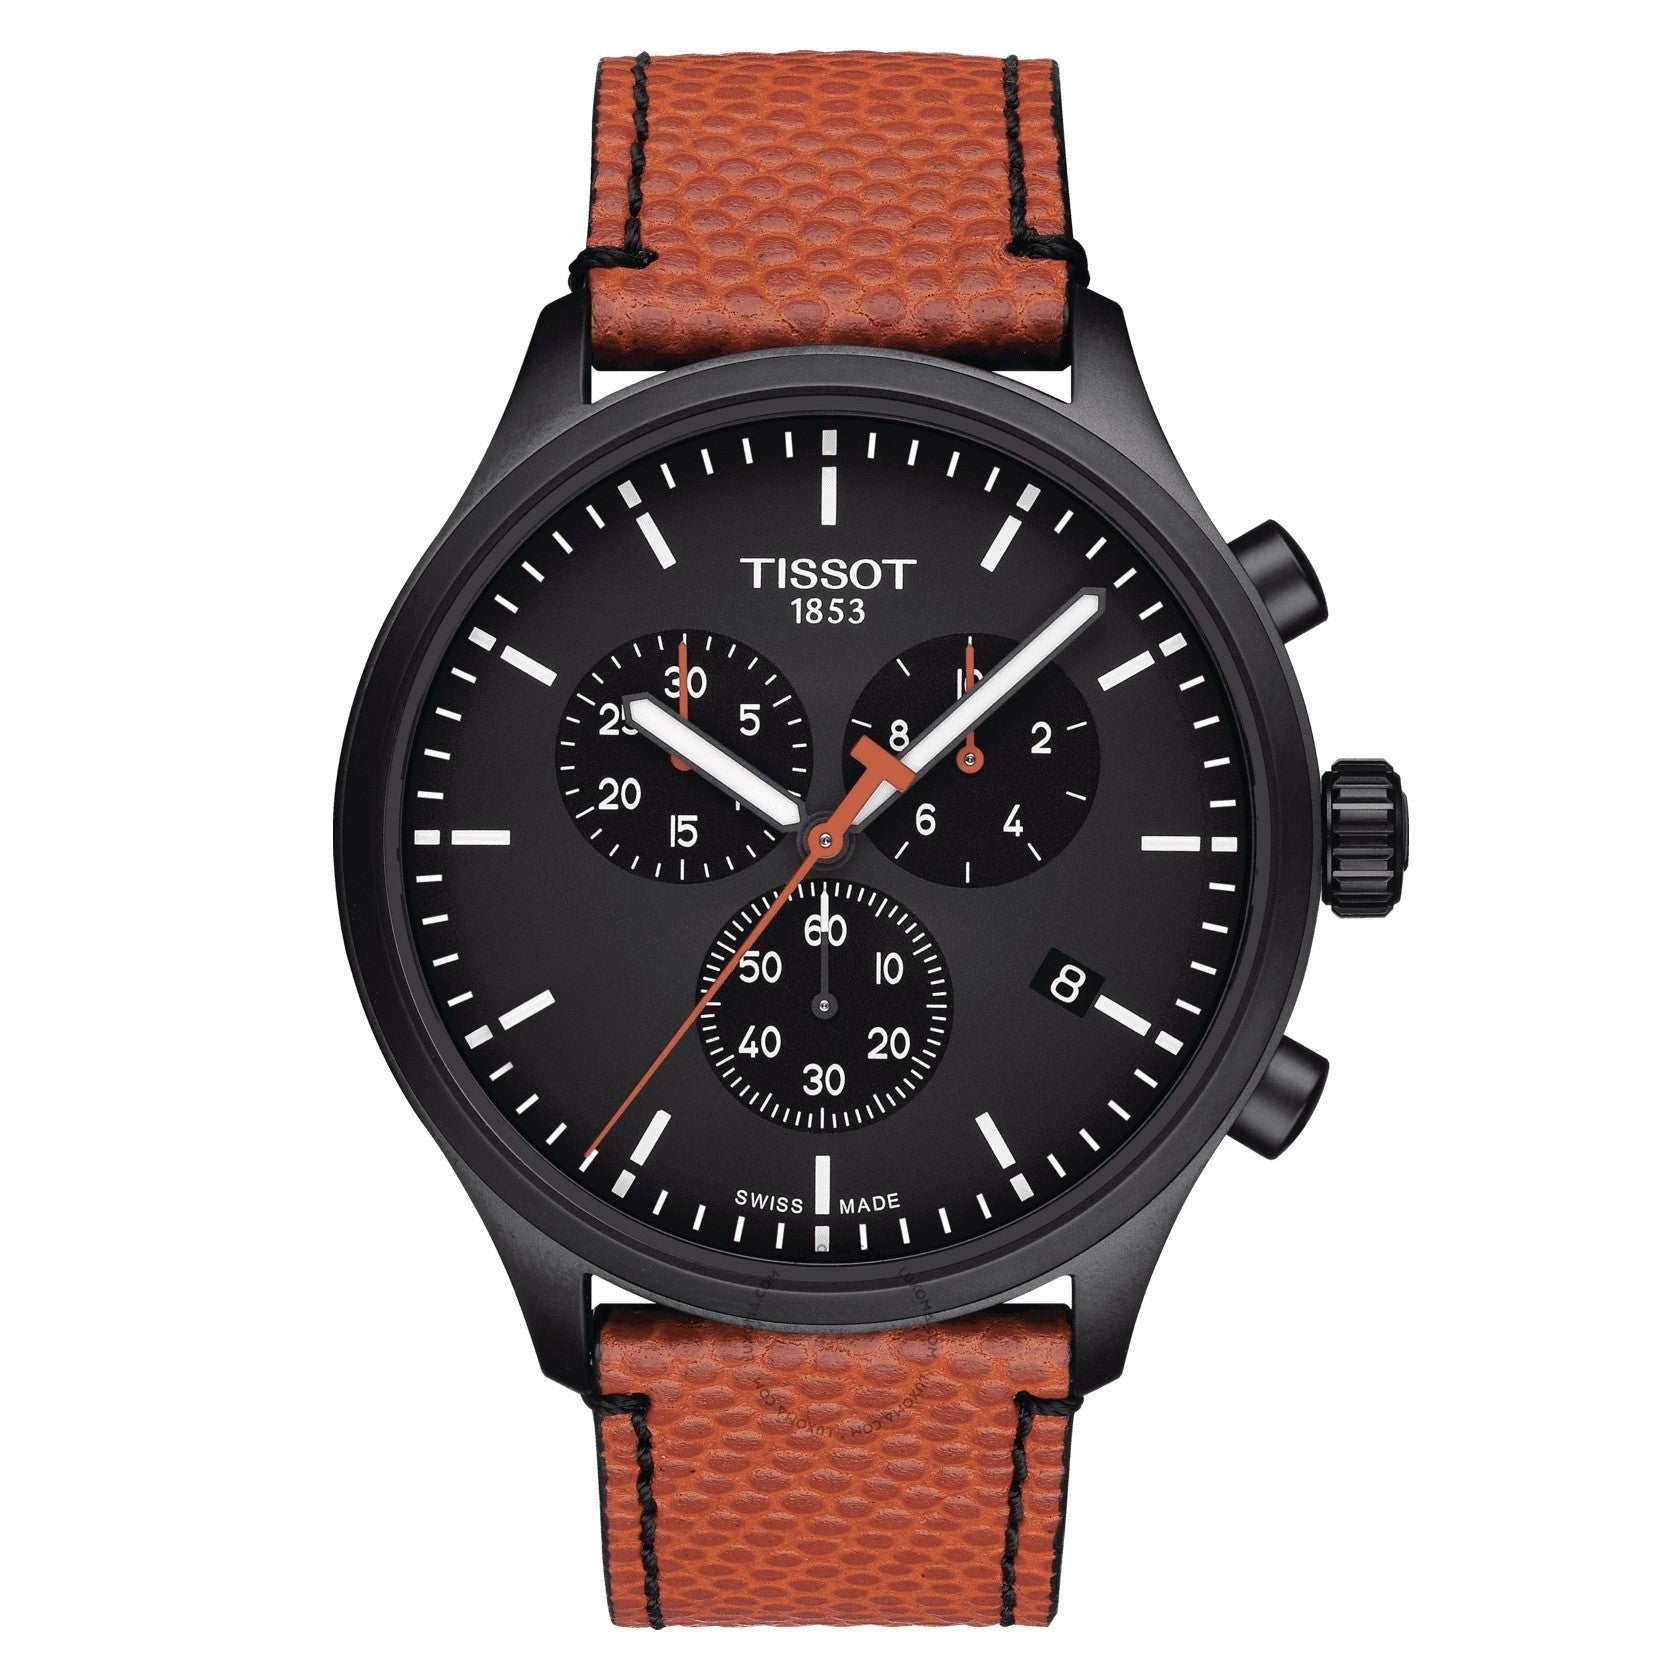 Tissot Special Collections Chronograph Black Dial Men's Watch T116.617.36.051.12